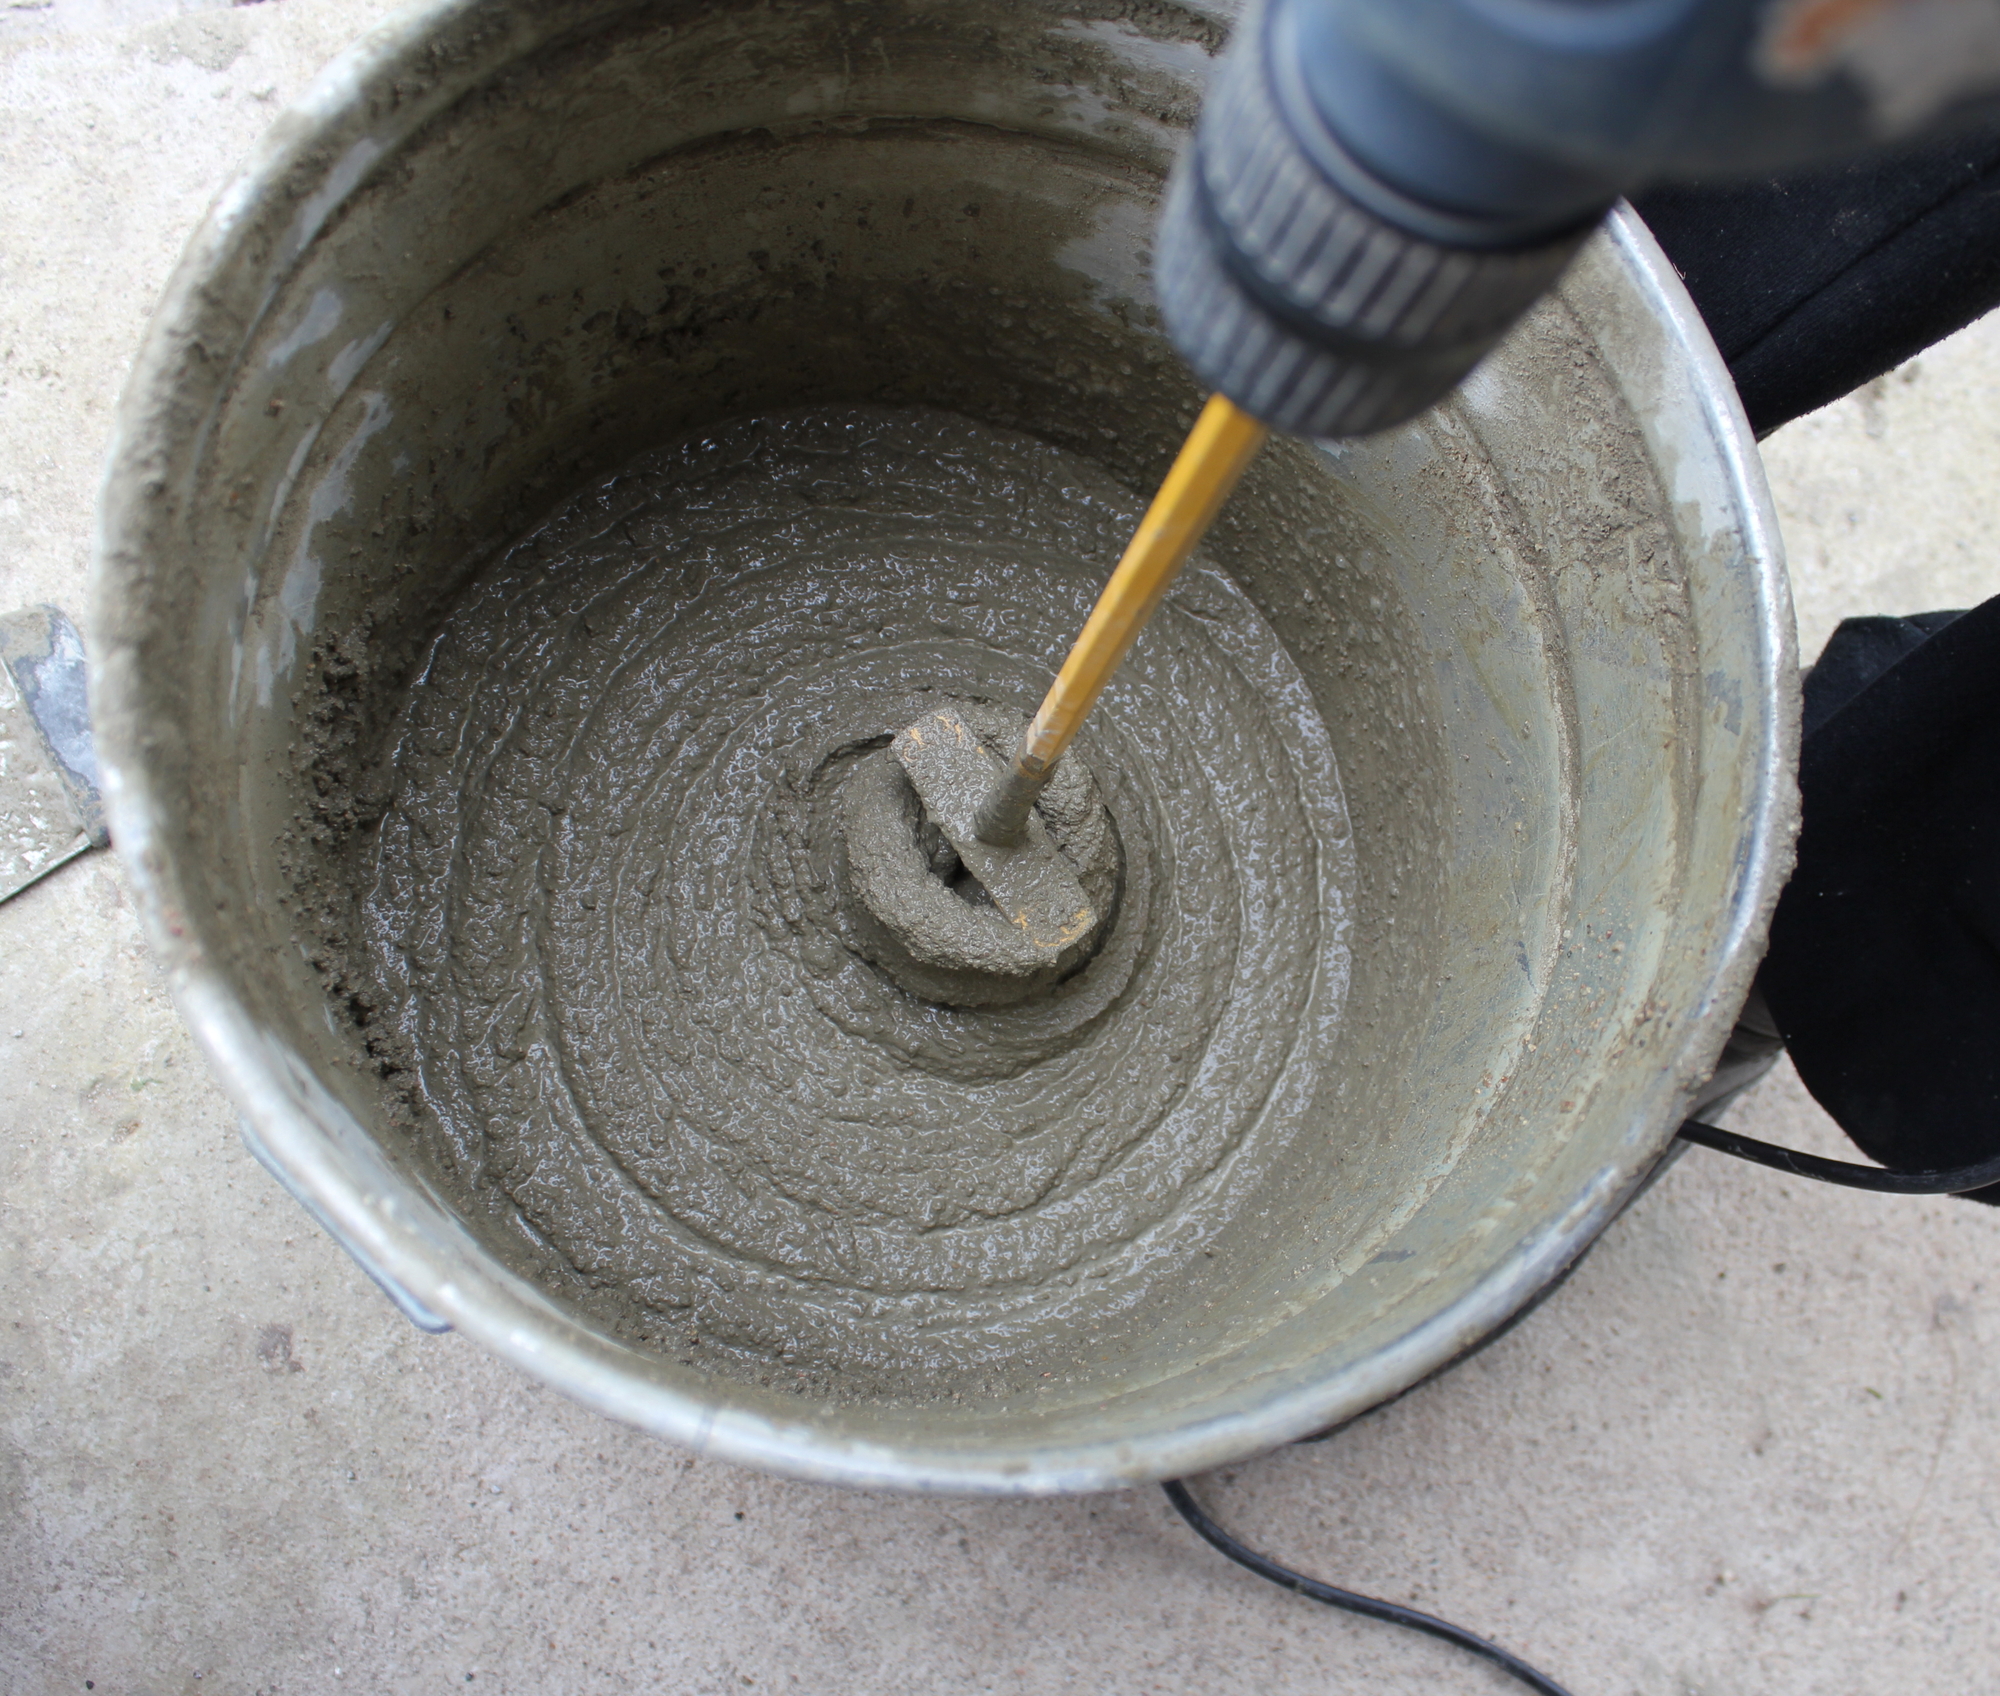 How To Mix Concrete In A 5 Gallon Bucket - QuikSpray Inc.